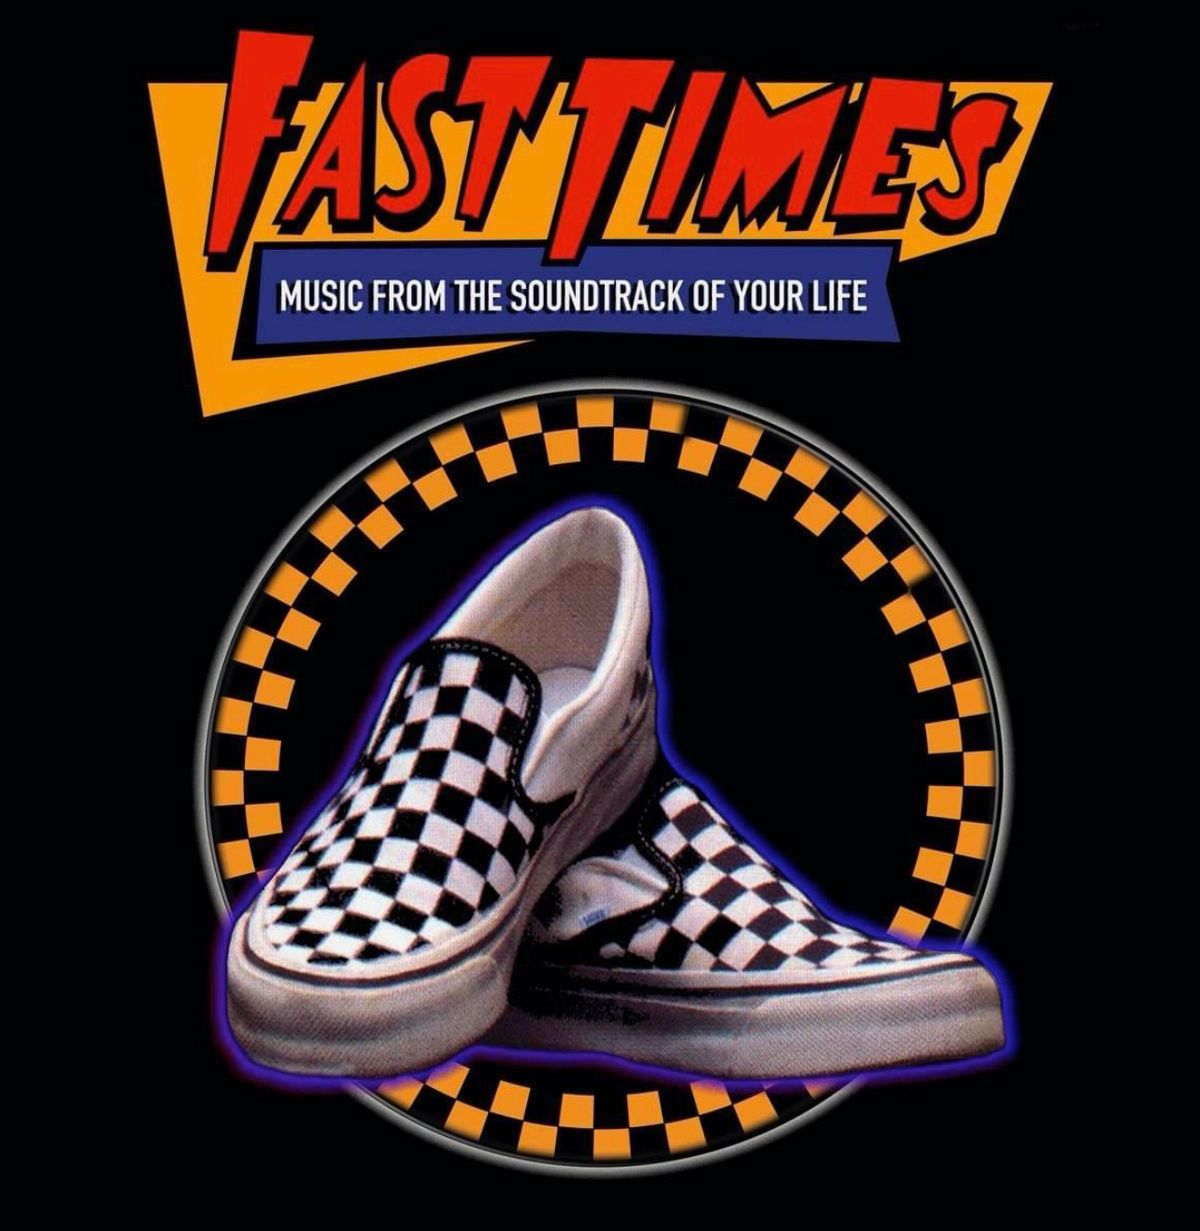 Fast Times lands in Crownsville 